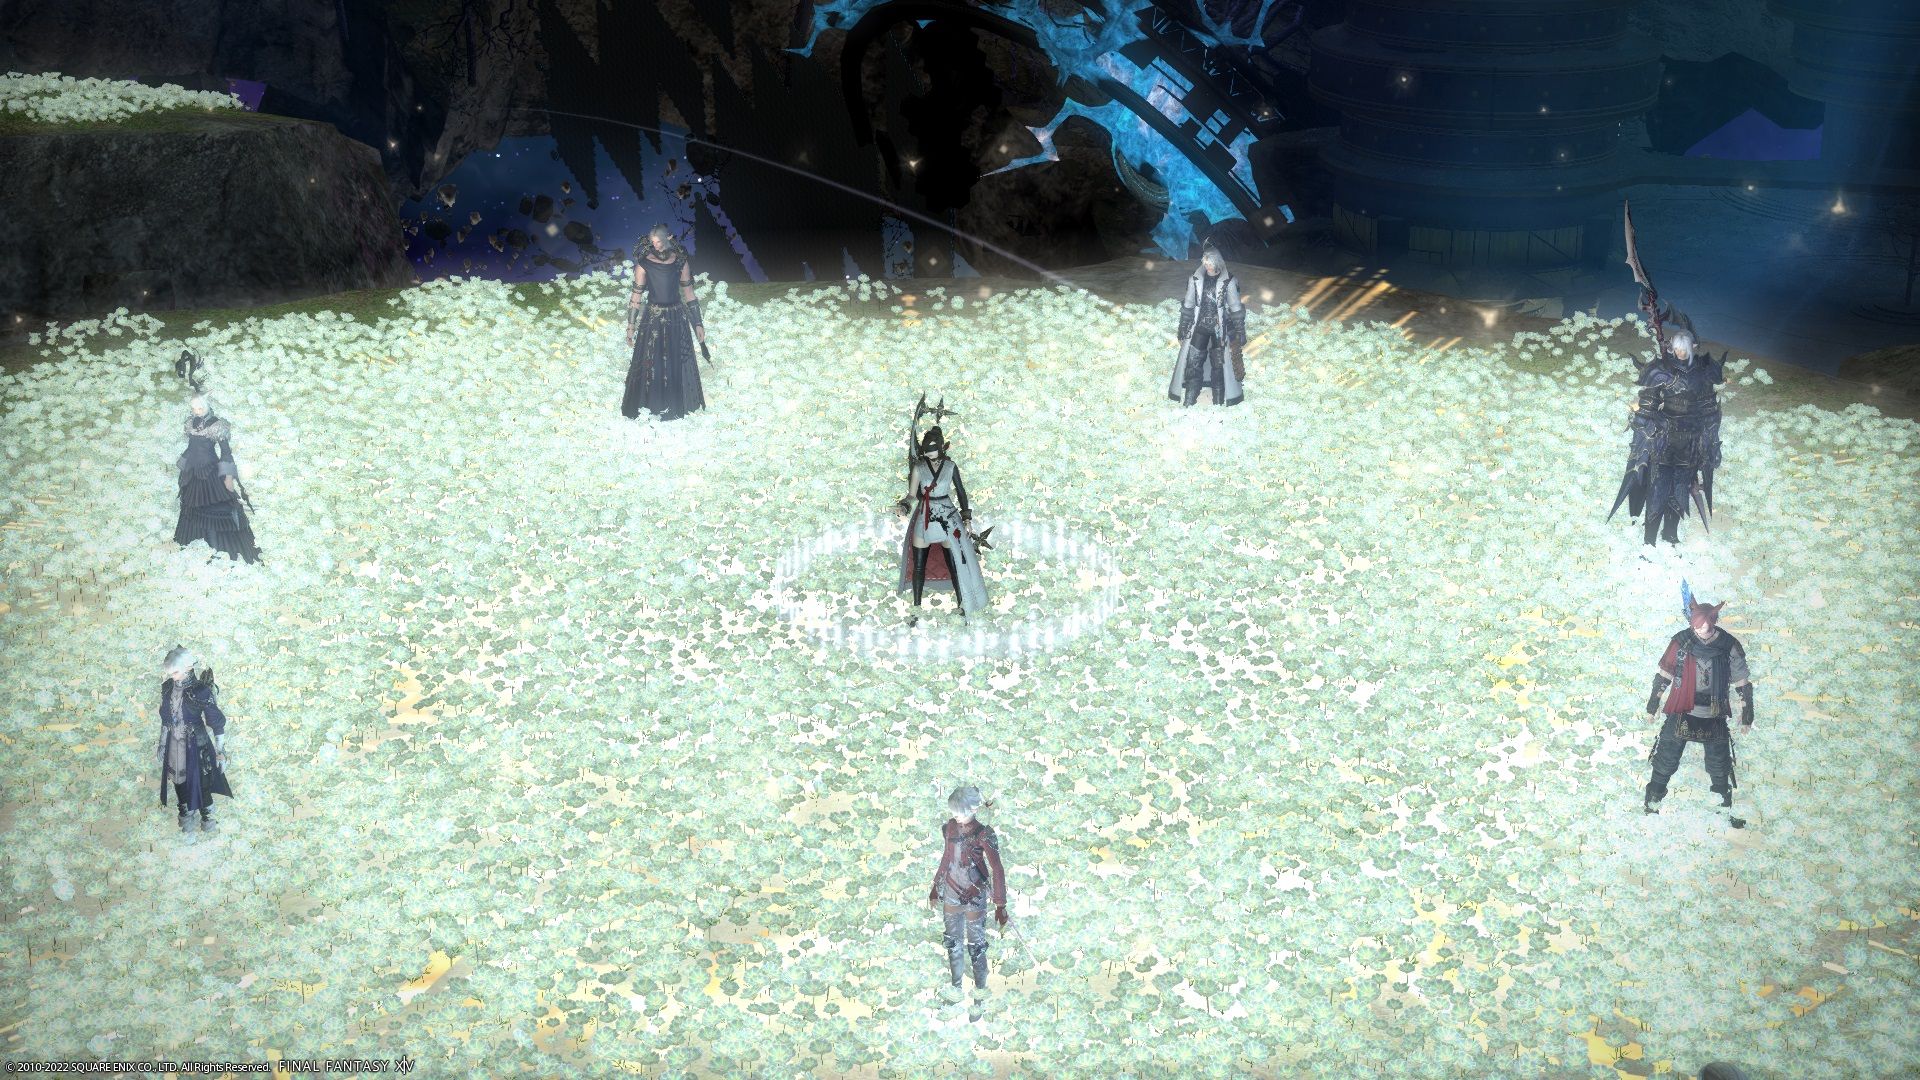 Final Fantasy 14 WoL and the scions in Ultima Thule